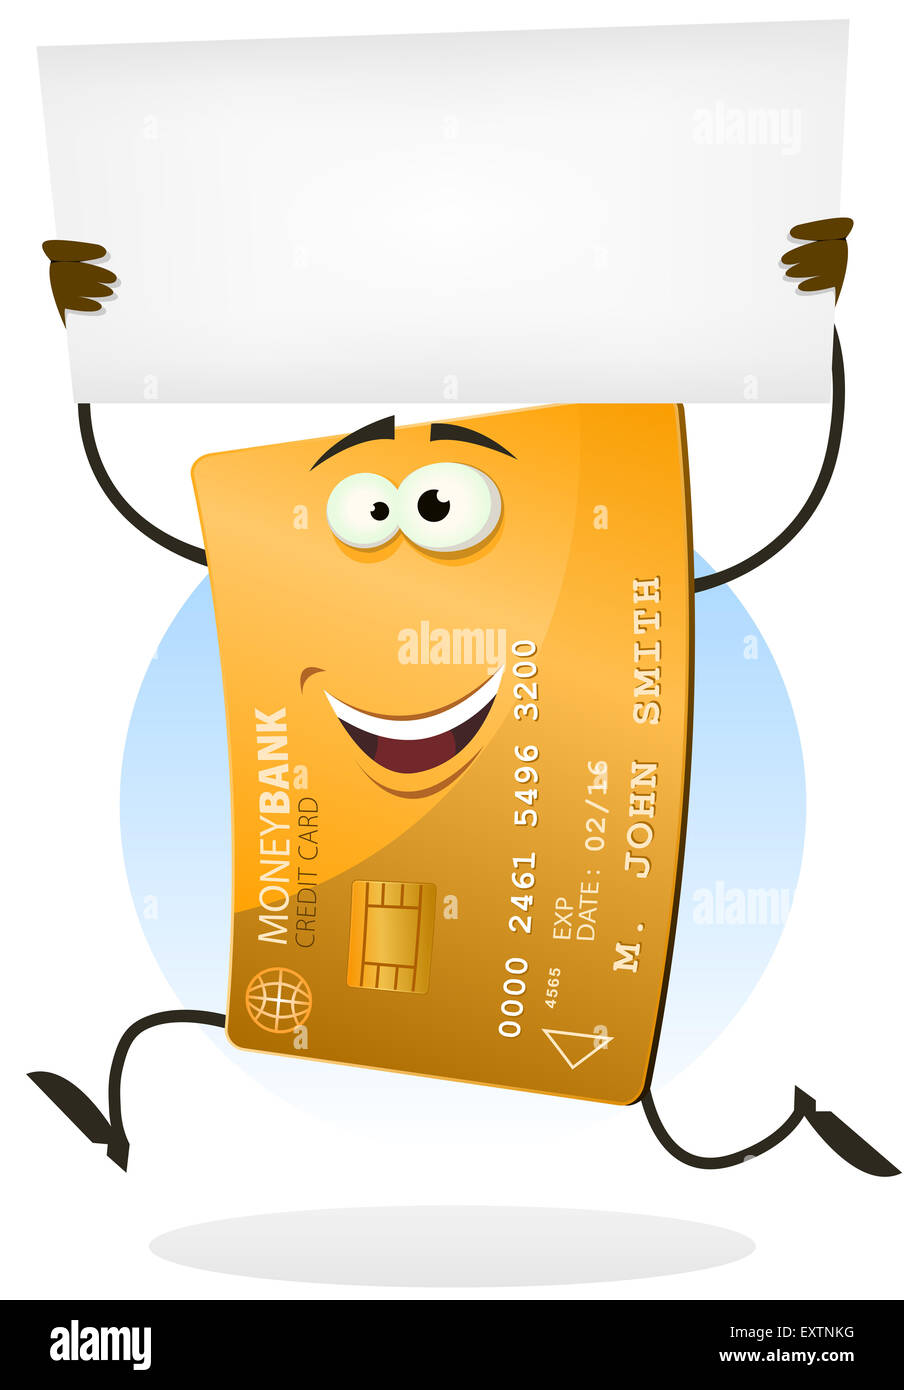 Illustration of a cartoon happy funny golden international business credit card character running Stock Photo